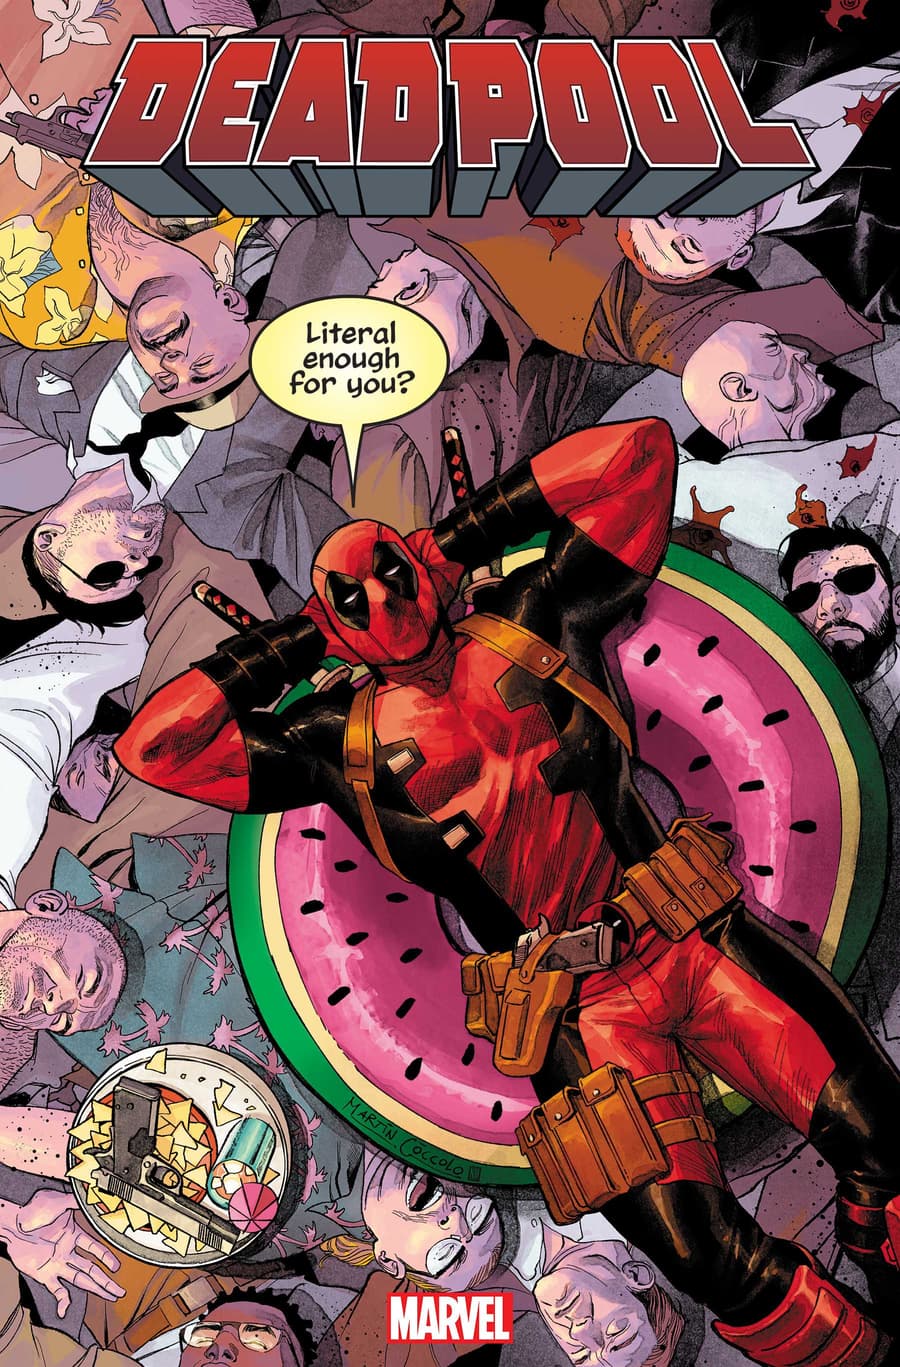 Marvel's Merc with the Mouth Is Back in Business in 'Deadpool' #1 ...